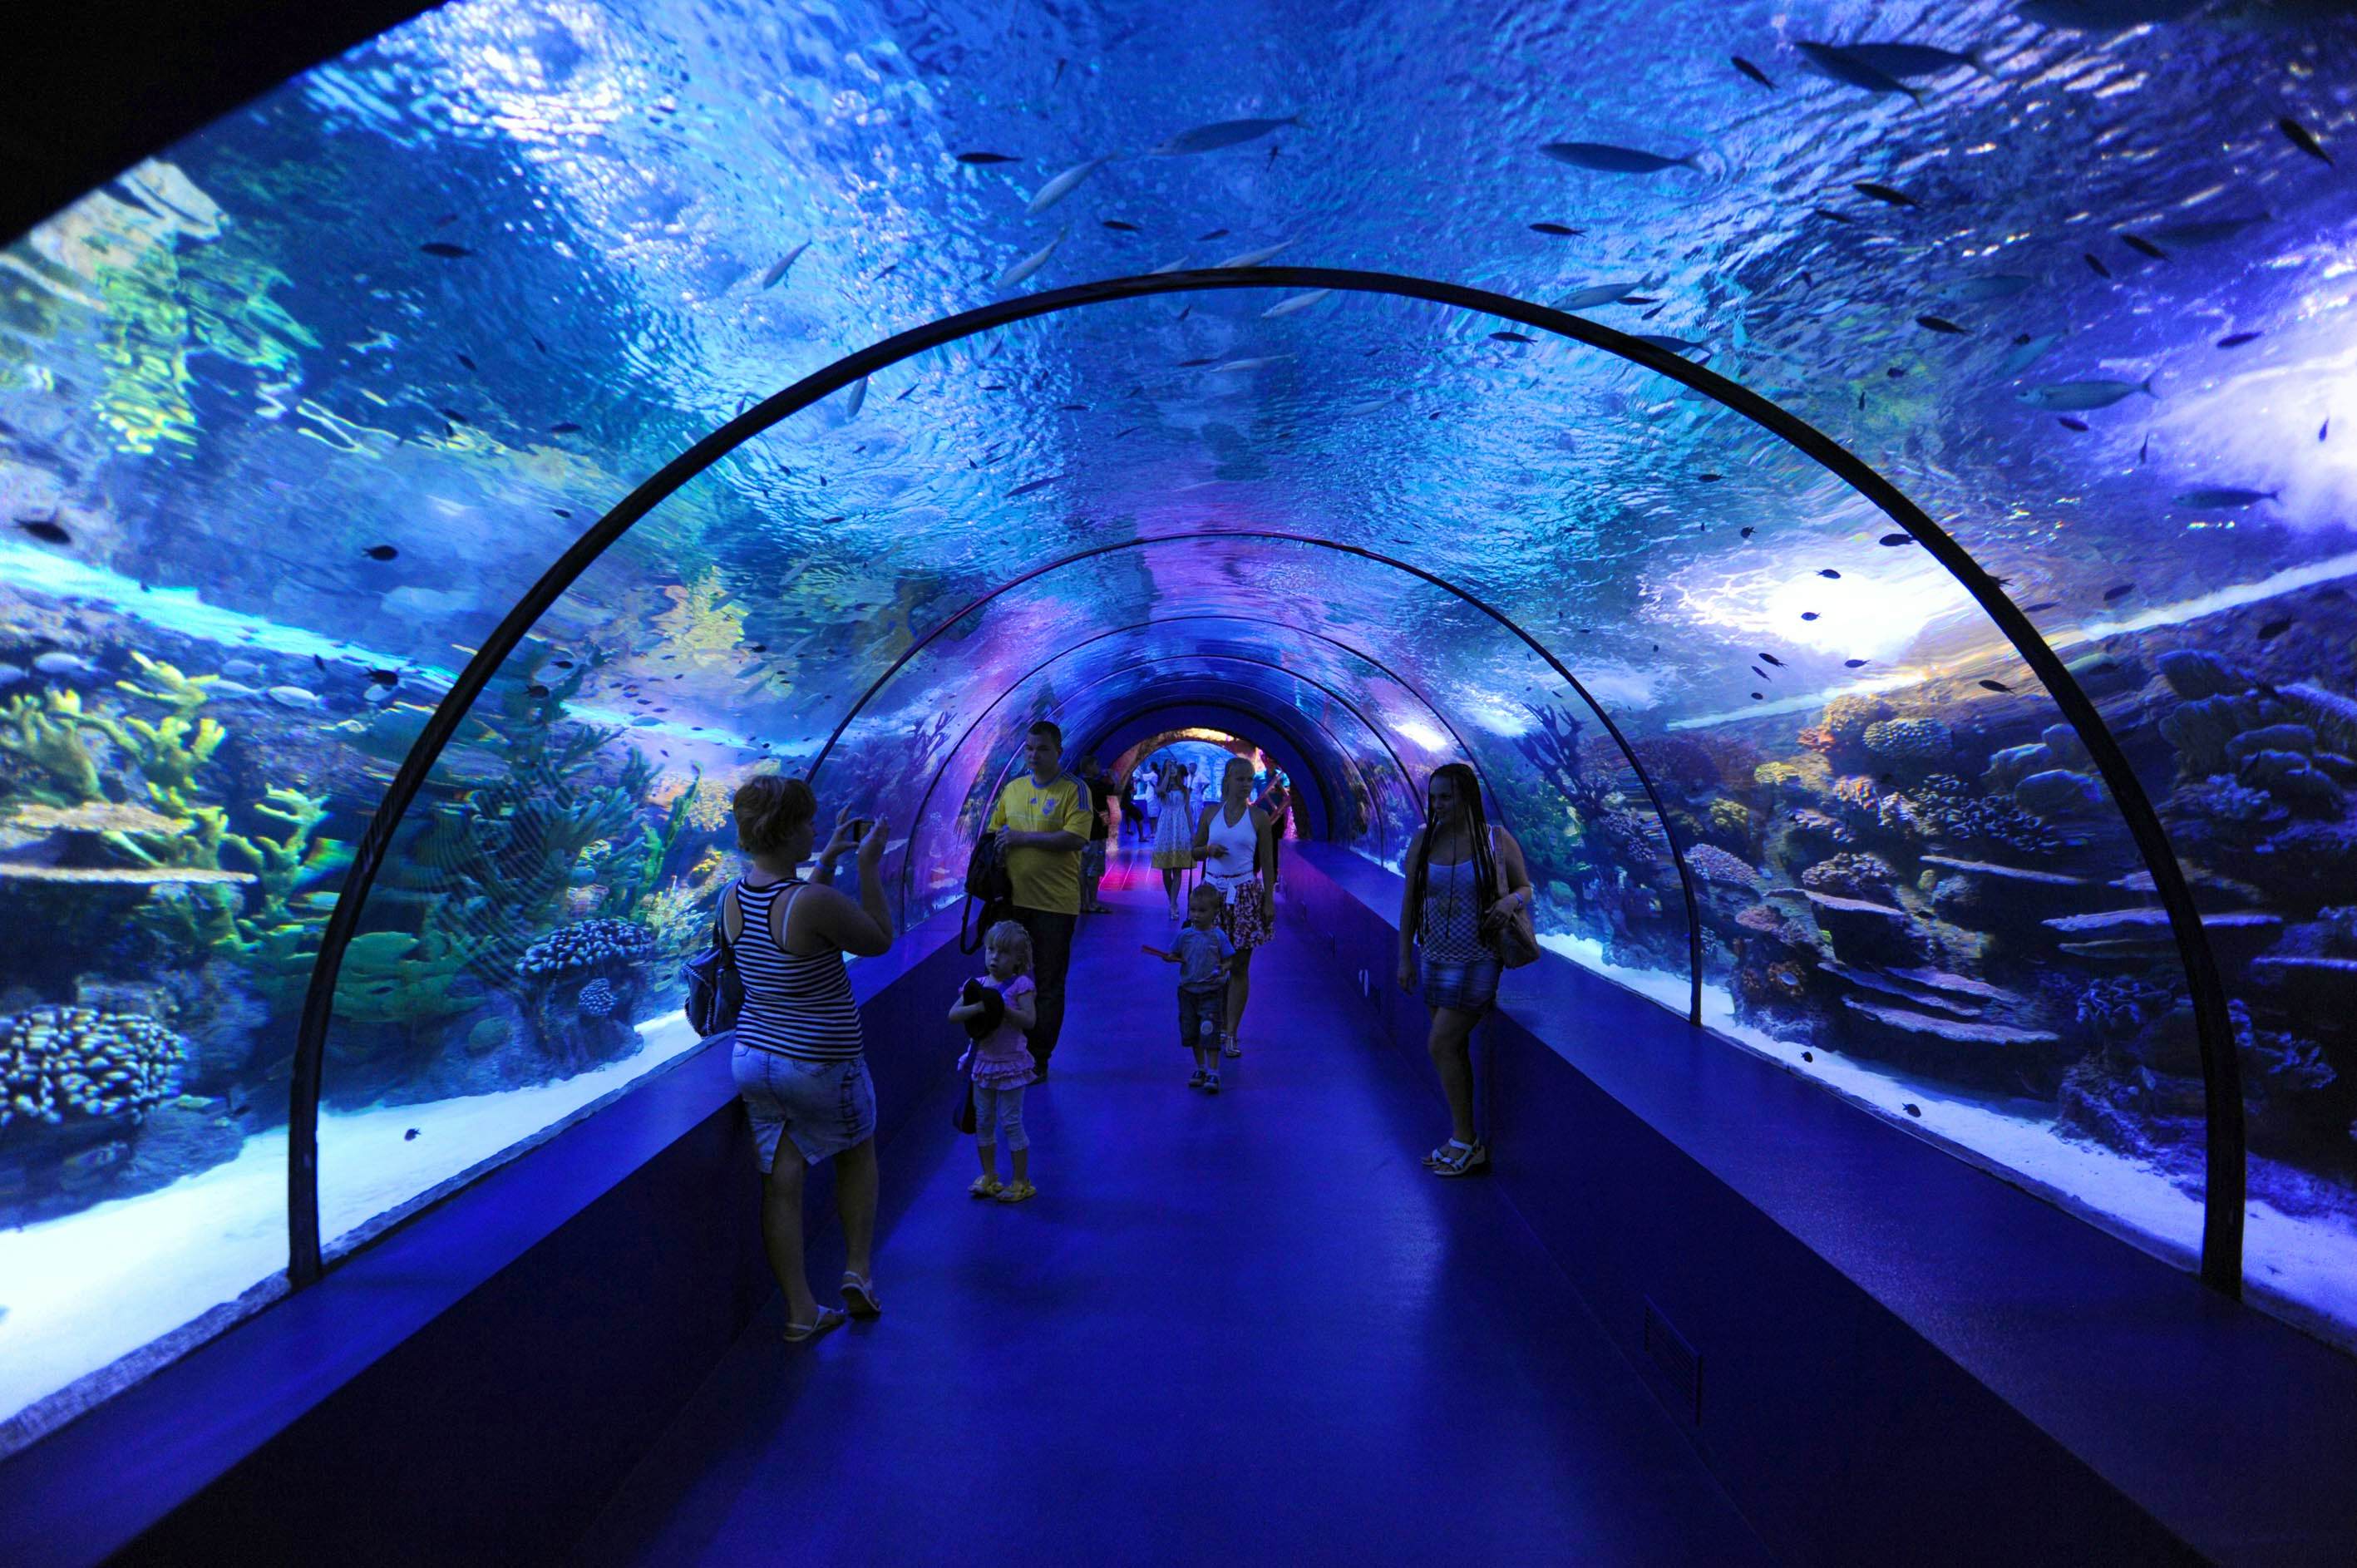 Full day Antalya Aquarium tour + AVM With Private Transfers